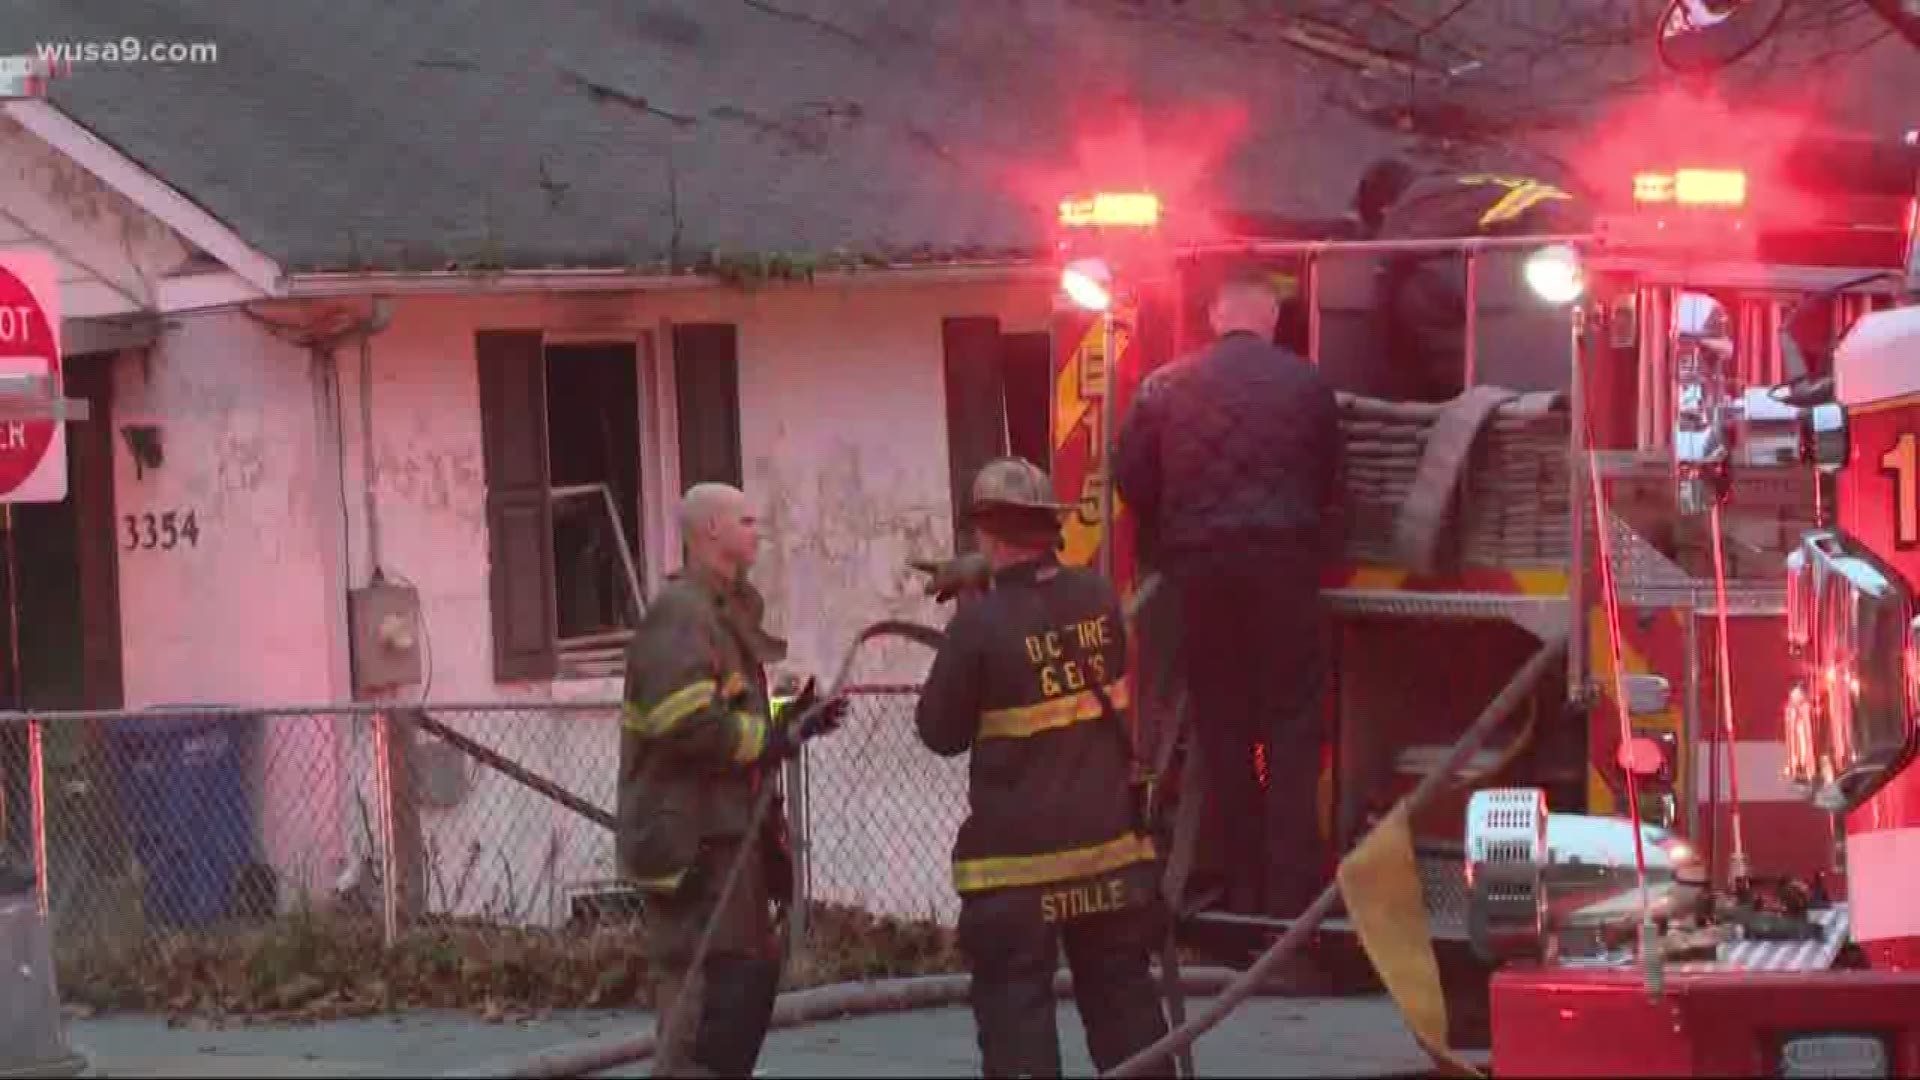 A man and a woman found dead inside a burning home in SE DC "may have suffered injuries unrelated to fire".